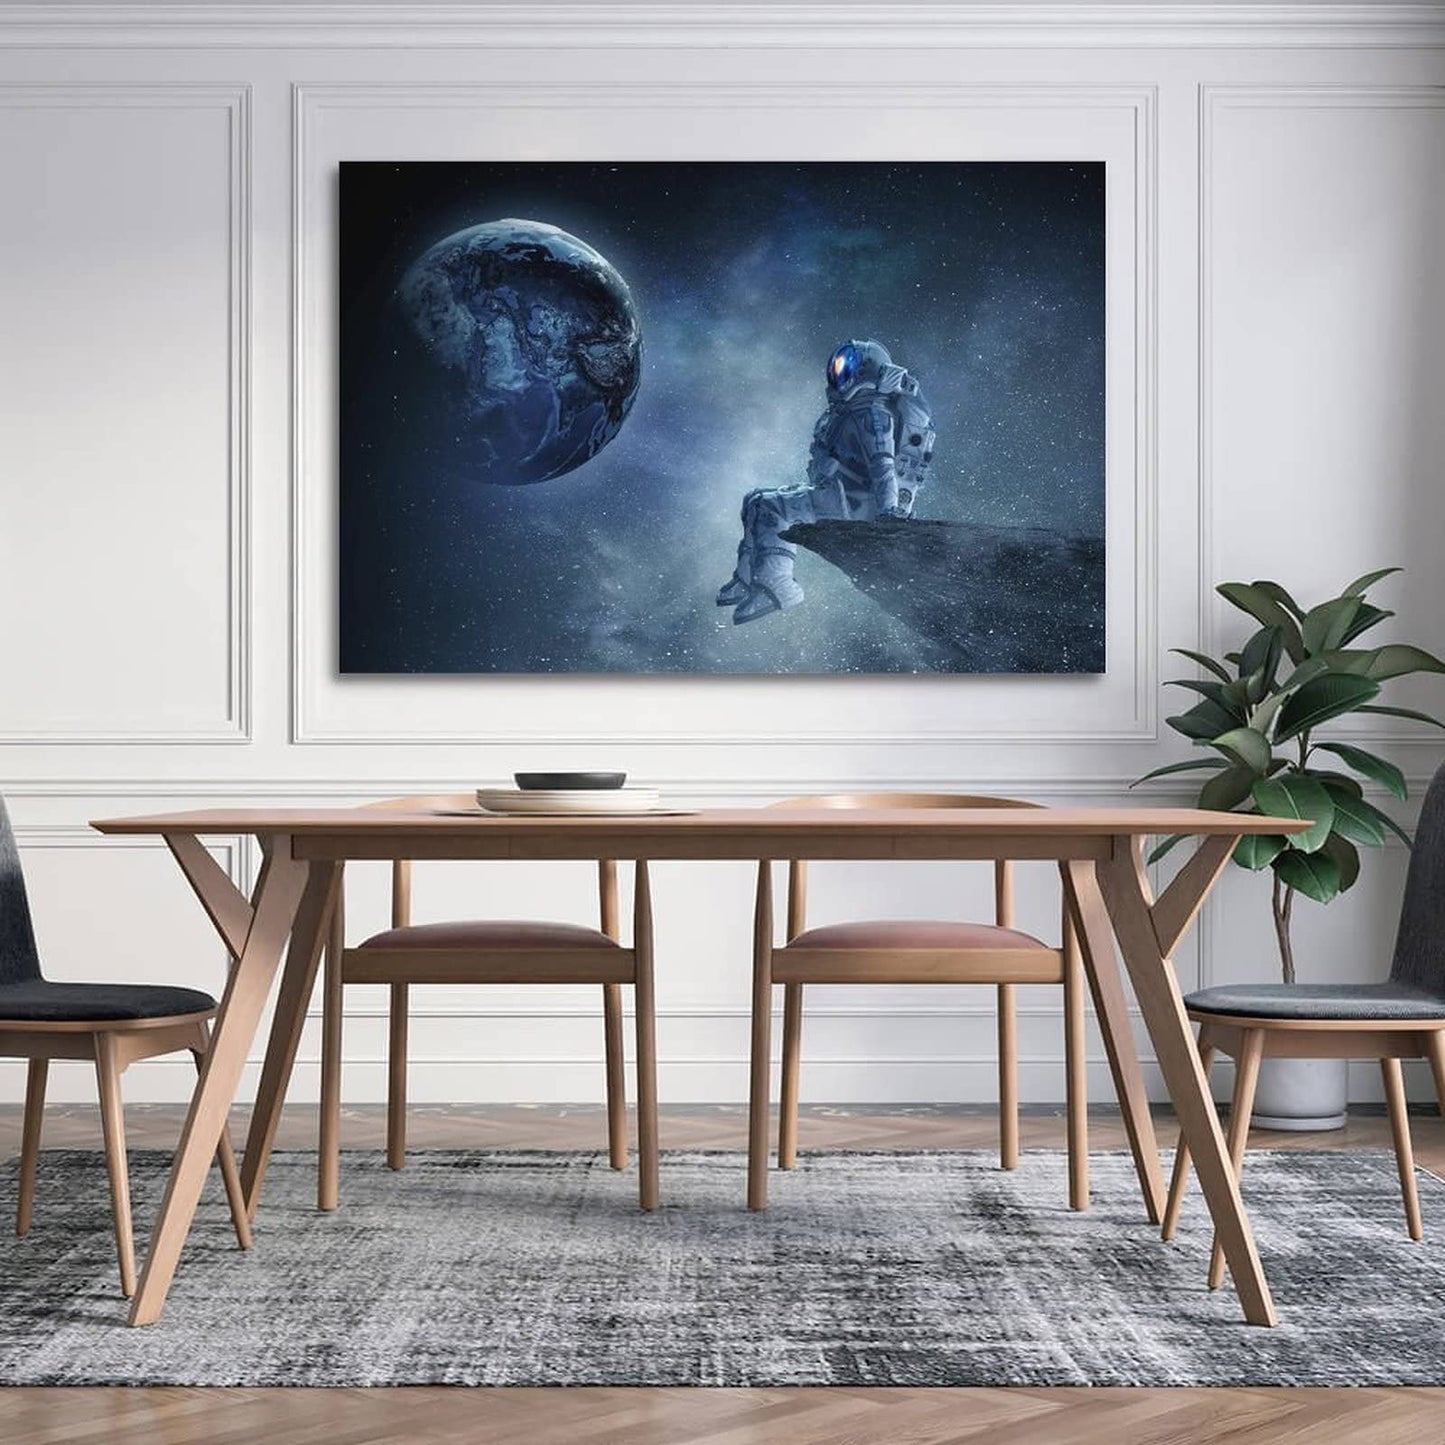 SUANA Astronaut Spaceman Posters for Men Canvas Art Poster And Wall Art Picture Print Modern Family Bedroom Decor Posters 12x18inch(30x45cm)